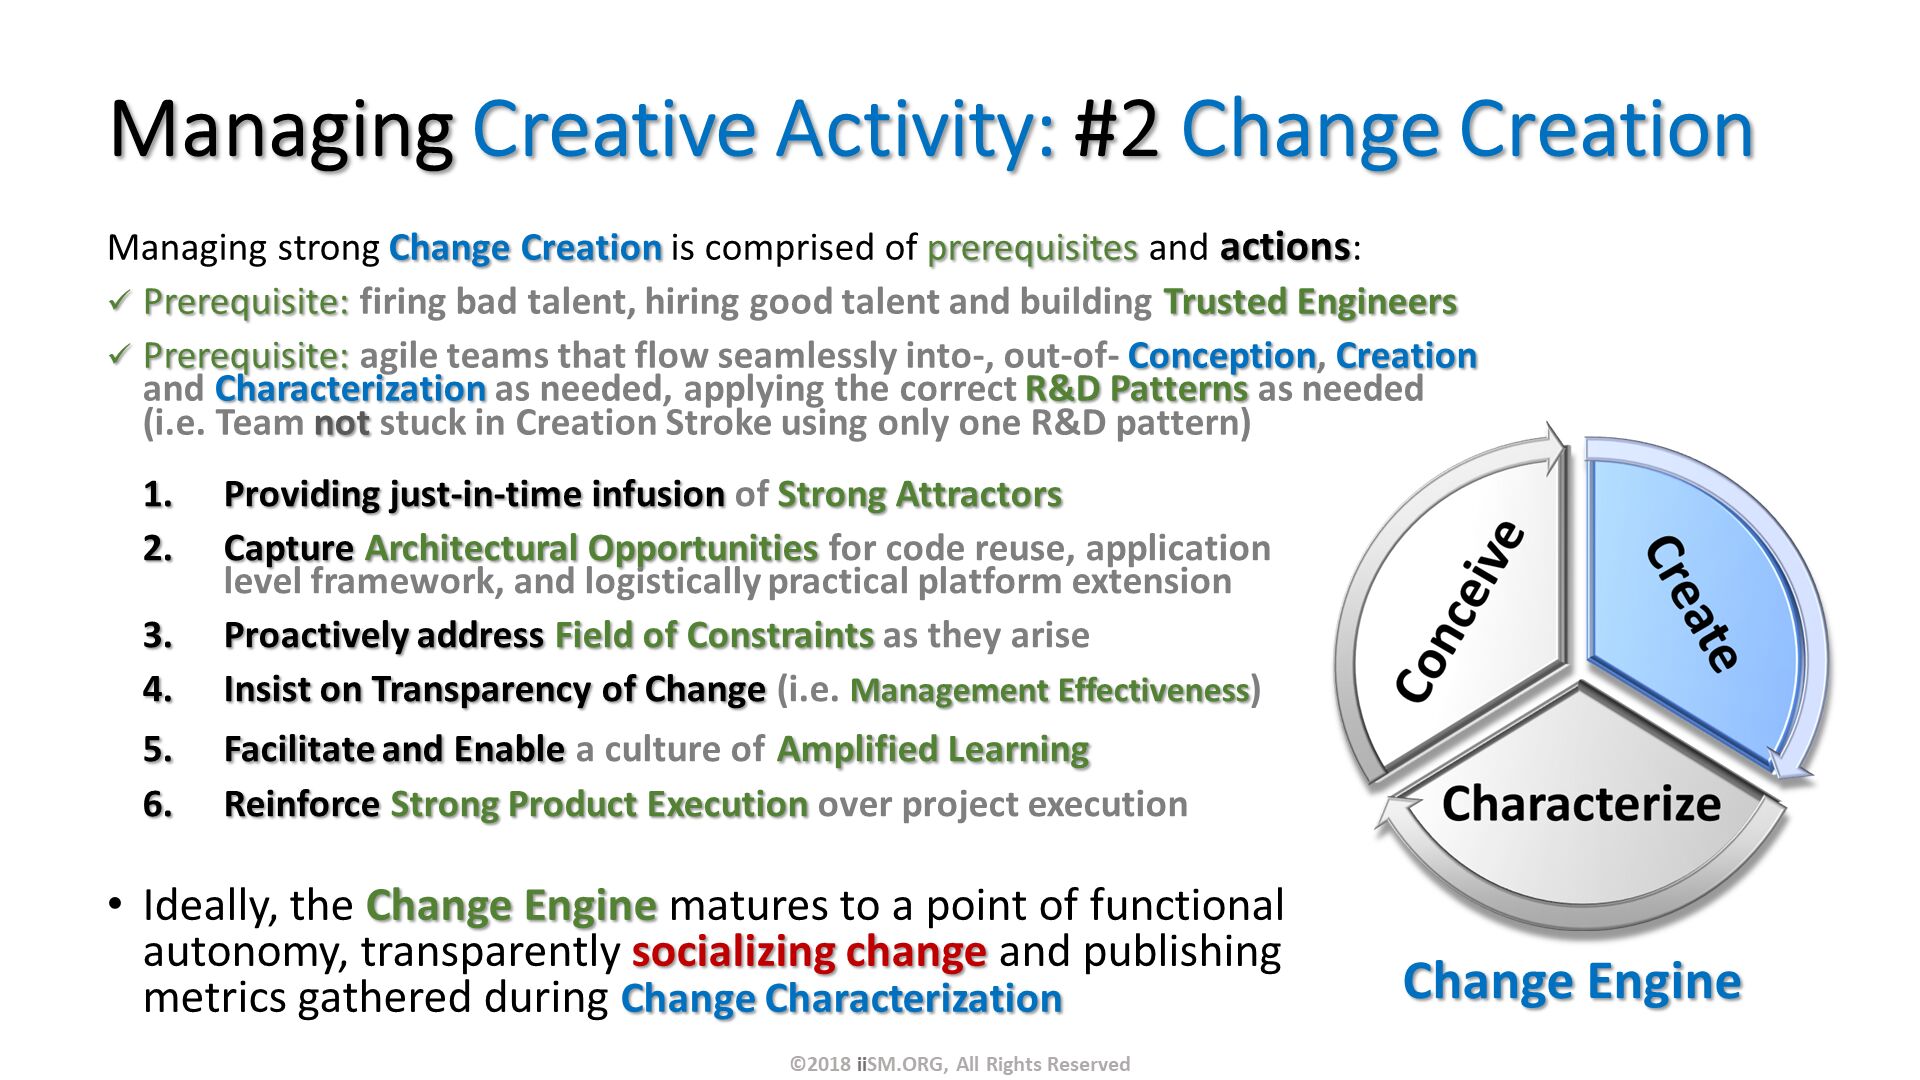 Managing Creative Activity: #2 Change Creation. Managing strong Change Creation is comprised of prerequisites and actions:
Prerequisite: firing bad talent, hiring good talent and building Trusted Engineers
Prerequisite: agile teams that flow seamlessly into-, out-of- Conception, Creation and Characterization as needed, applying the correct R&D Patterns as needed (i.e. Team not stuck in Creation Stroke using only one R&D pattern). Ideally, the Change Engine matures to a point of functional autonomy, transparently socializing change and publishing metrics gathered during Change Characterization
. Change Engine . Providing just-in-time infusion of Strong Attractors
Capture Architectural Opportunities for code reuse, application level framework, and logistically practical platform extension
Proactively address Field of Constraints as they arise
Insist on Transparency of Change (i.e. Management Effectiveness)
Facilitate and Enable a culture of Amplified Learning
Reinforce Strong Product Execution over project execution. ©2018 iiSM.ORG, All Rights Reserved. 